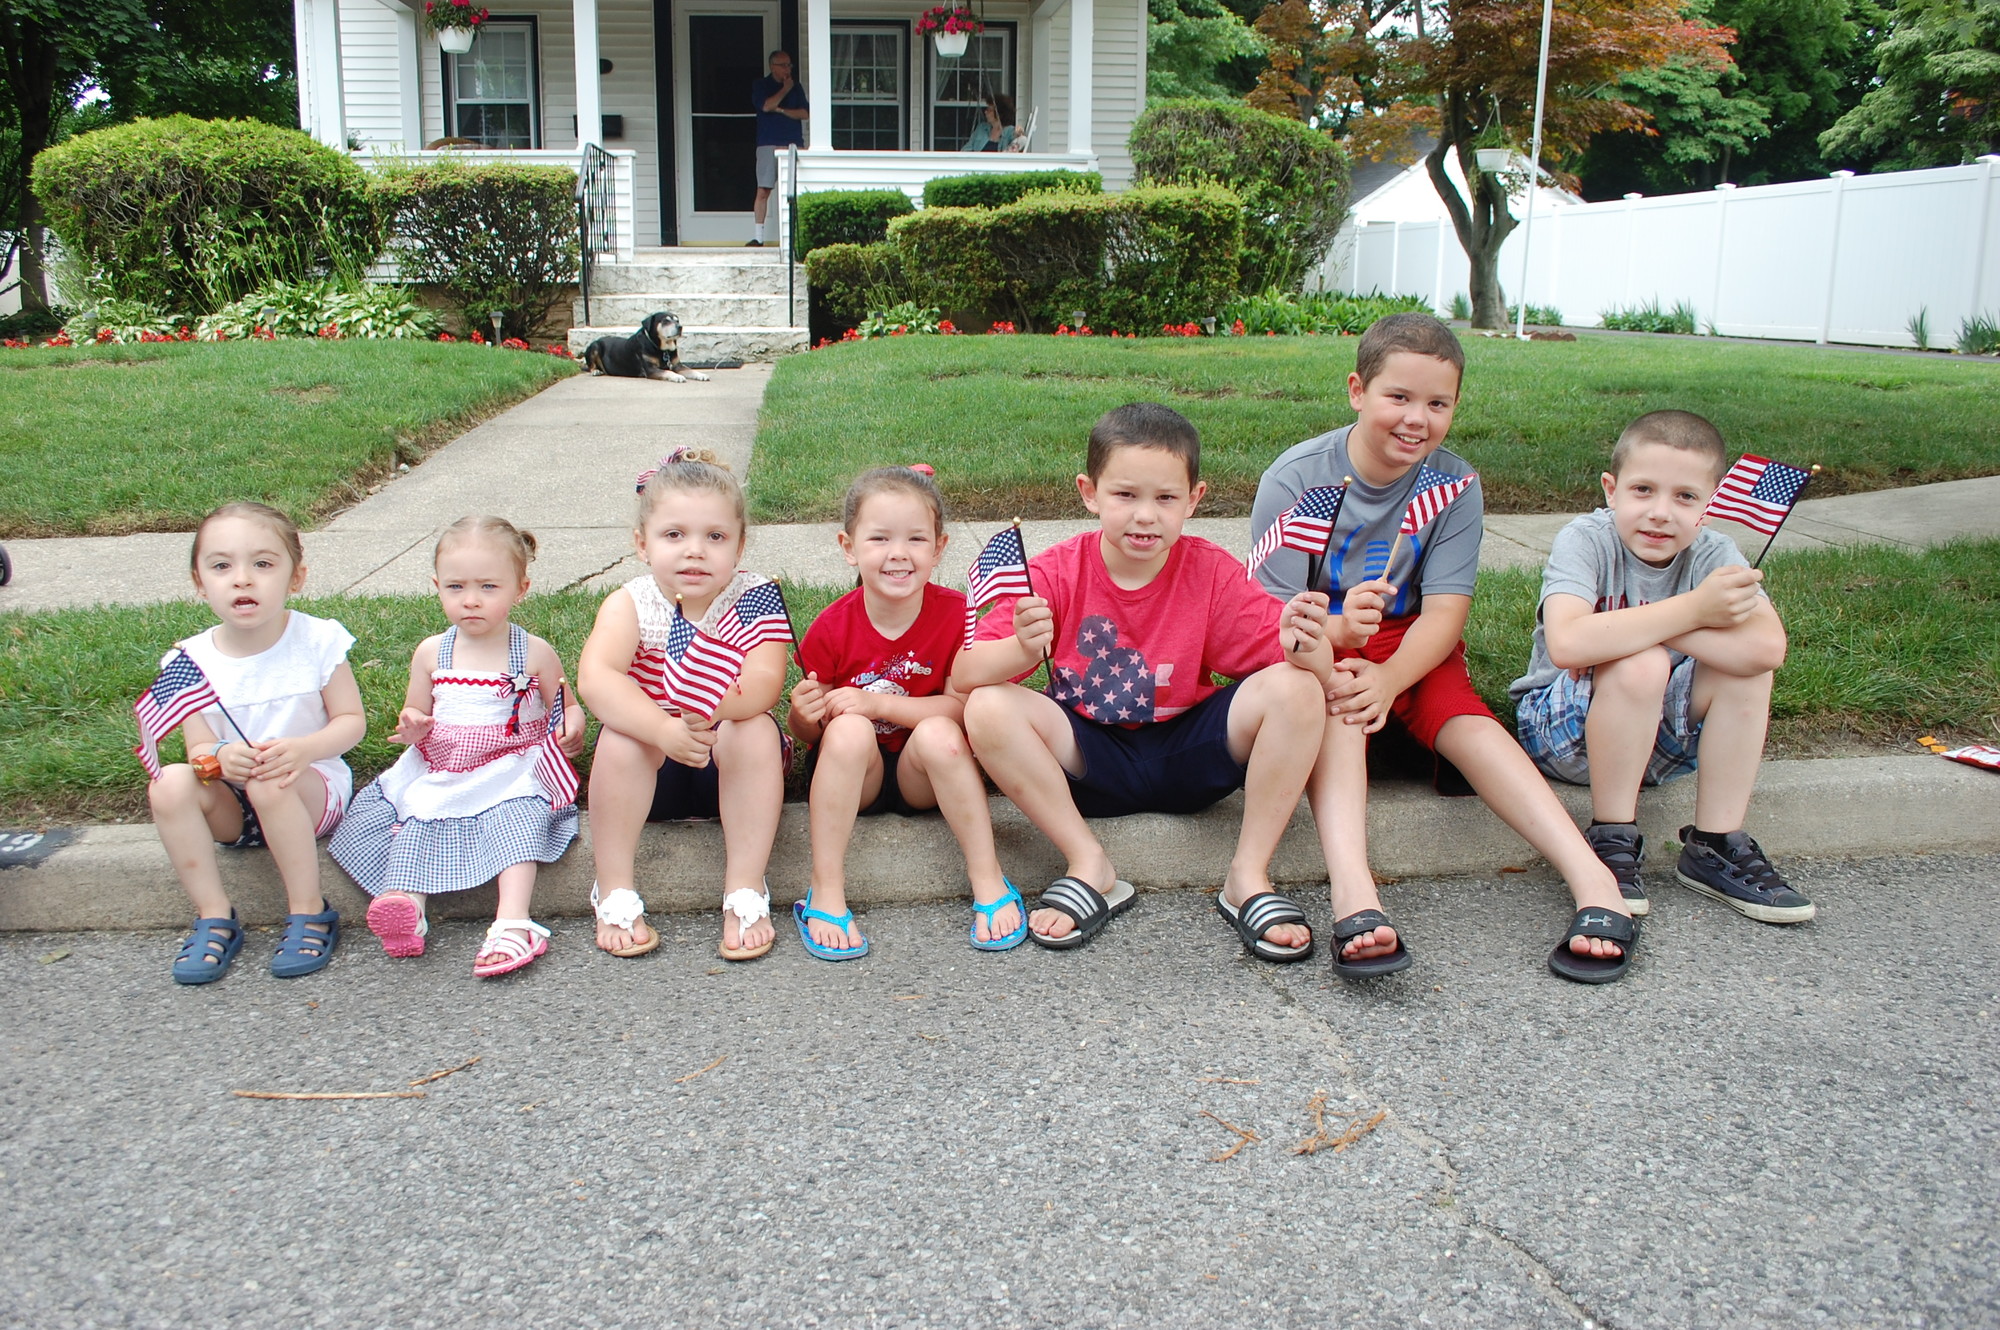 A group of children showed their American pride as they waited on Island Road for the parade to pass by.